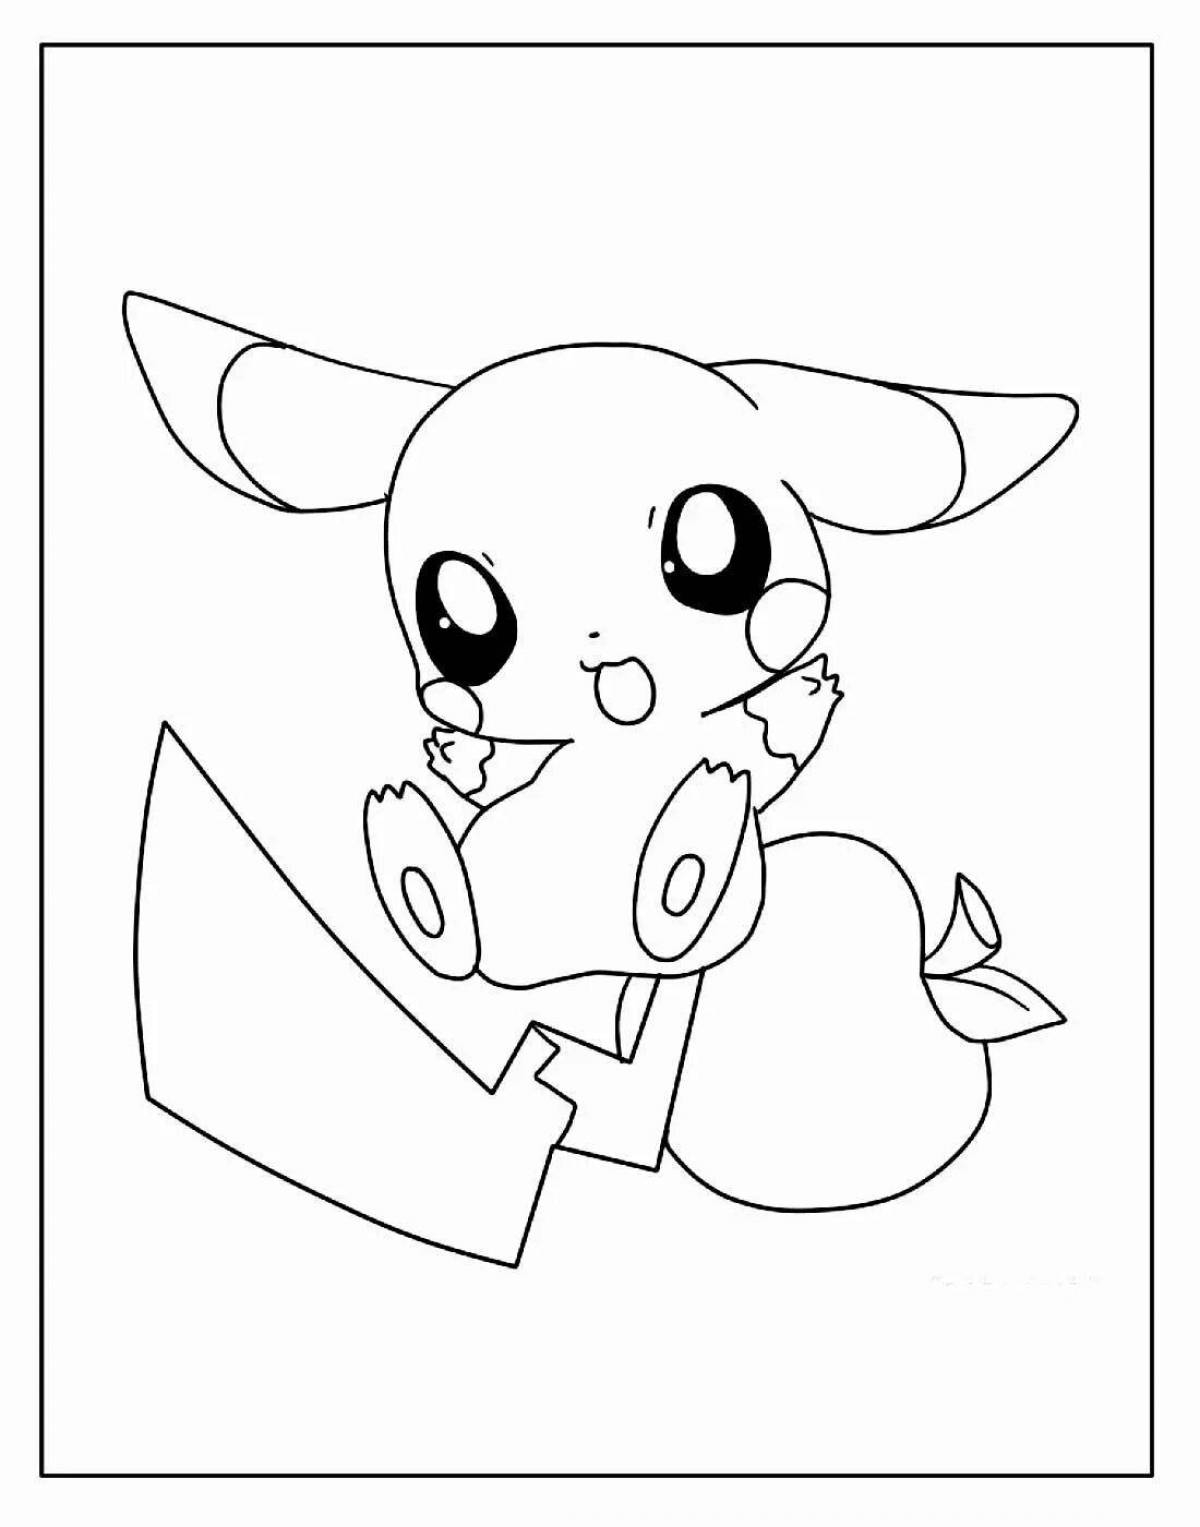 Complex anime beast coloring page